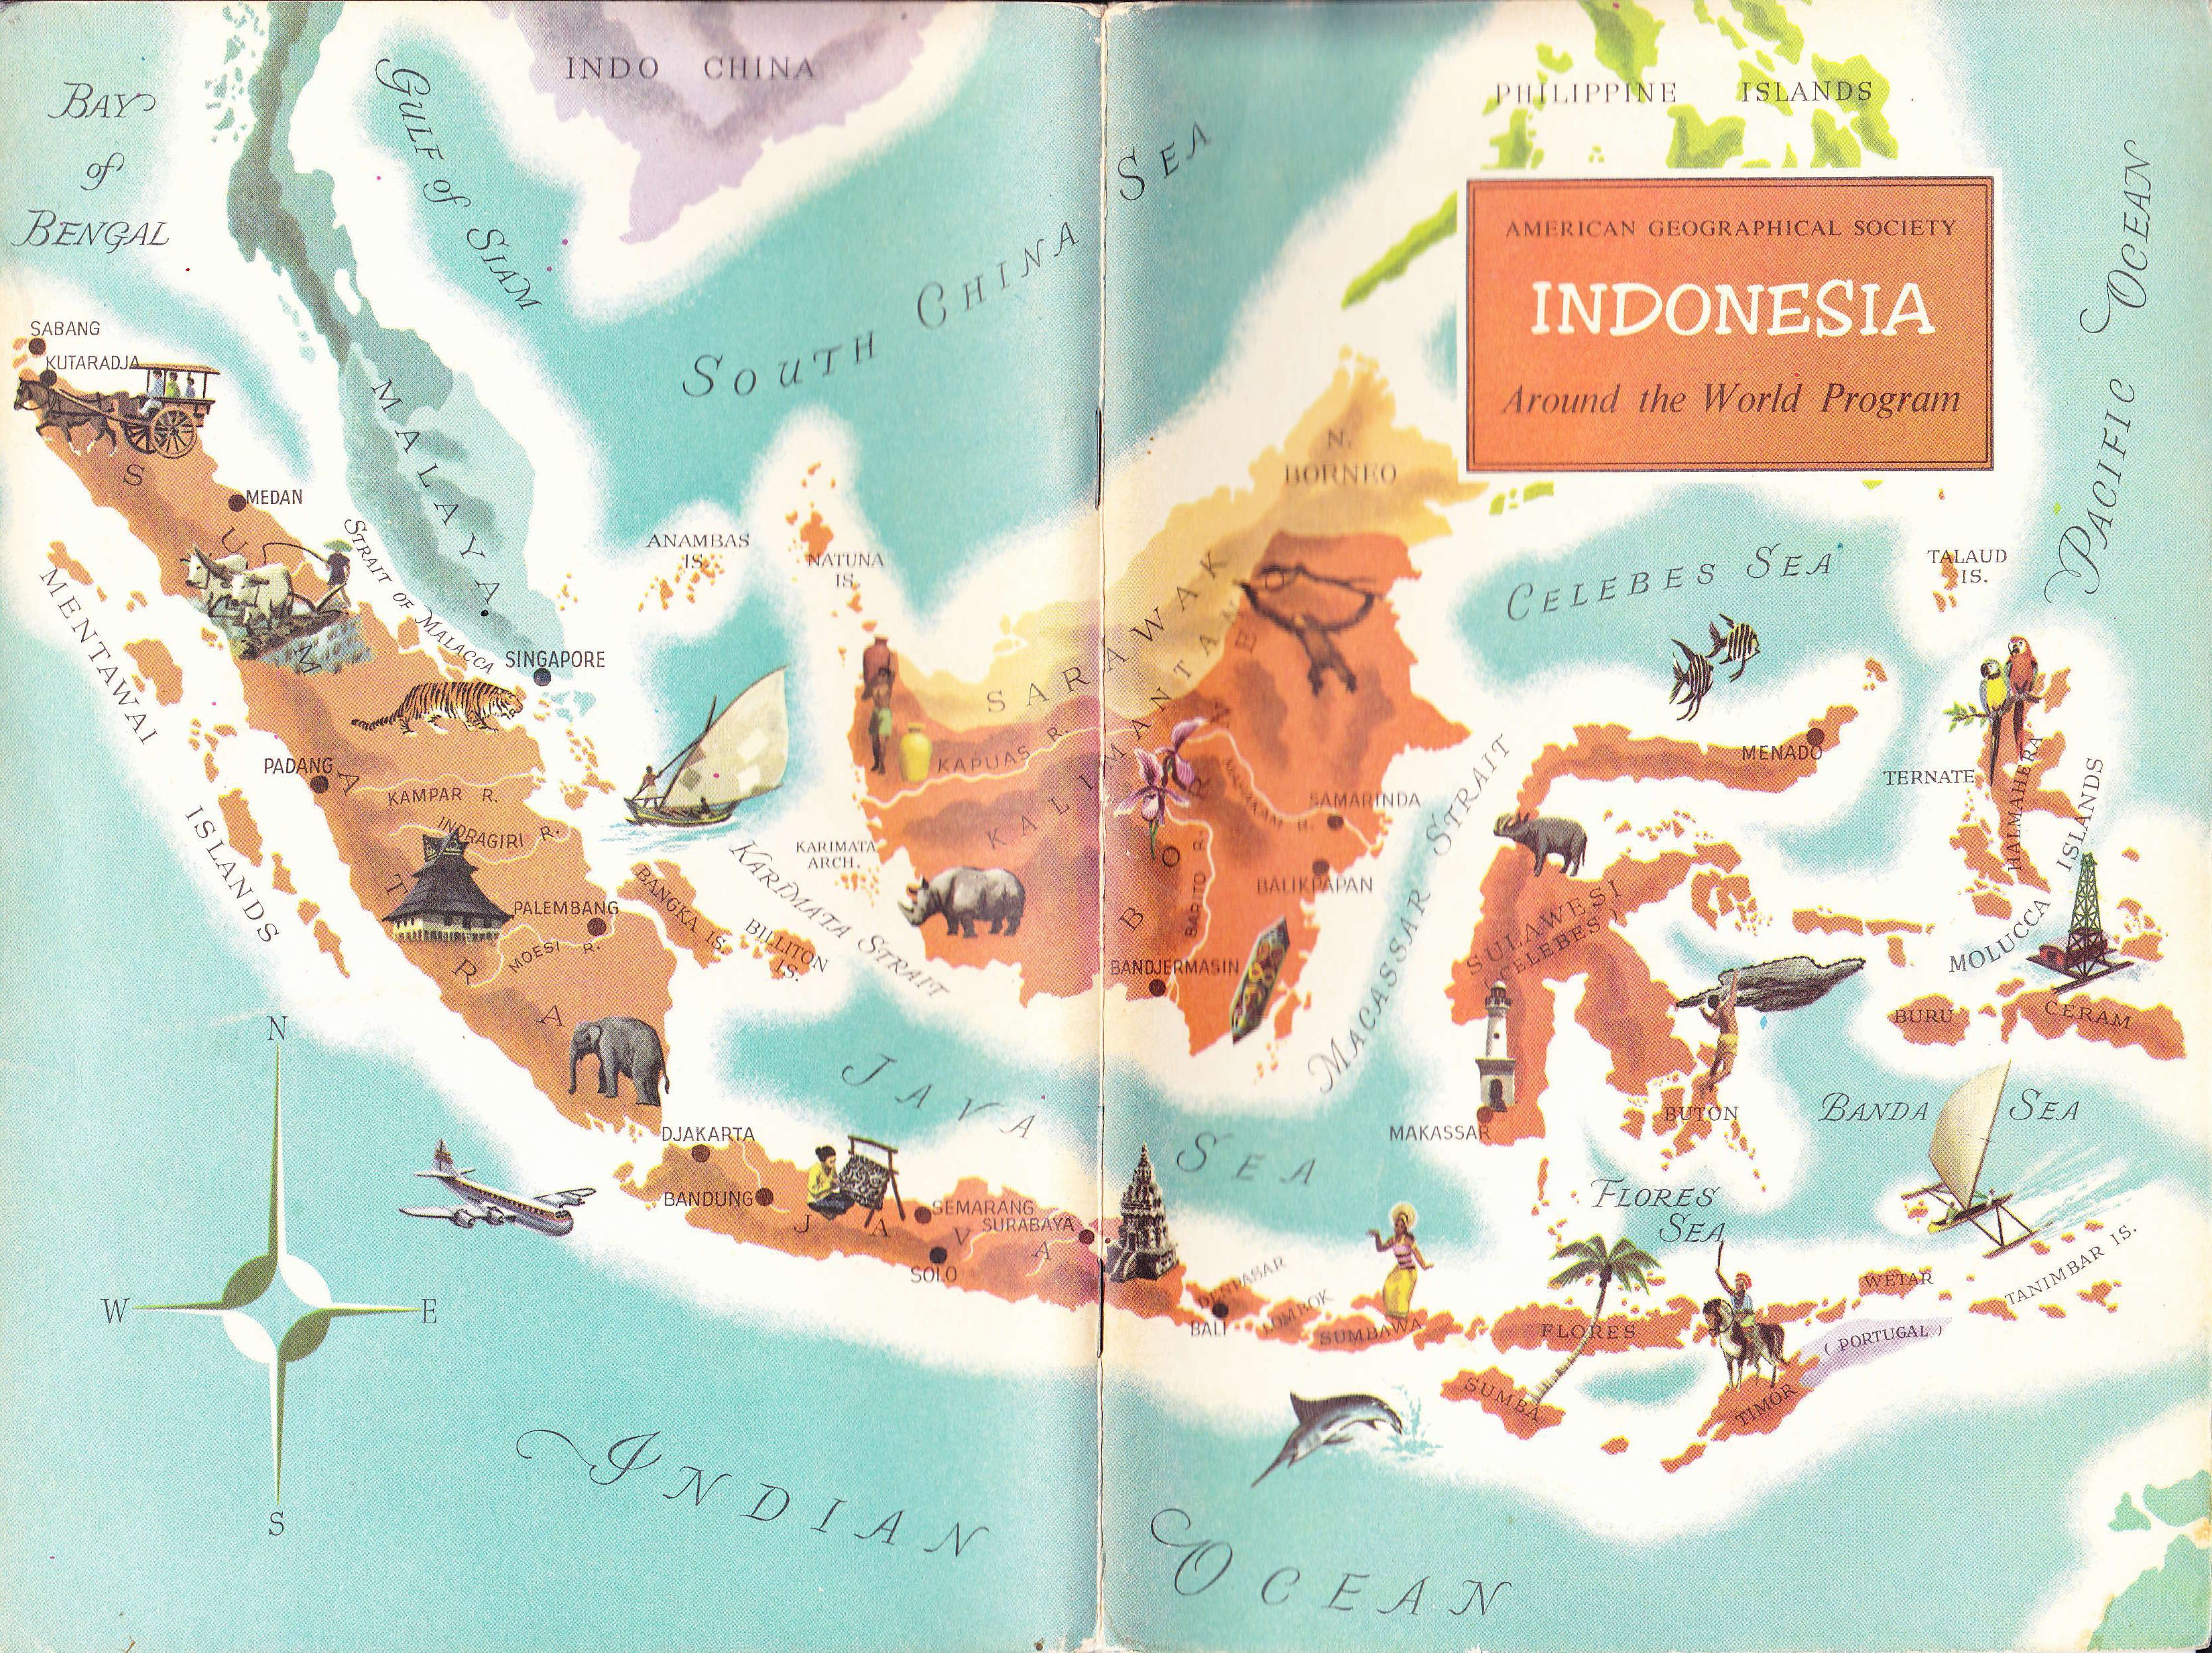 Old Map of Indonesia you've never been there, you should. Kertas dinding, Seni, Illustration